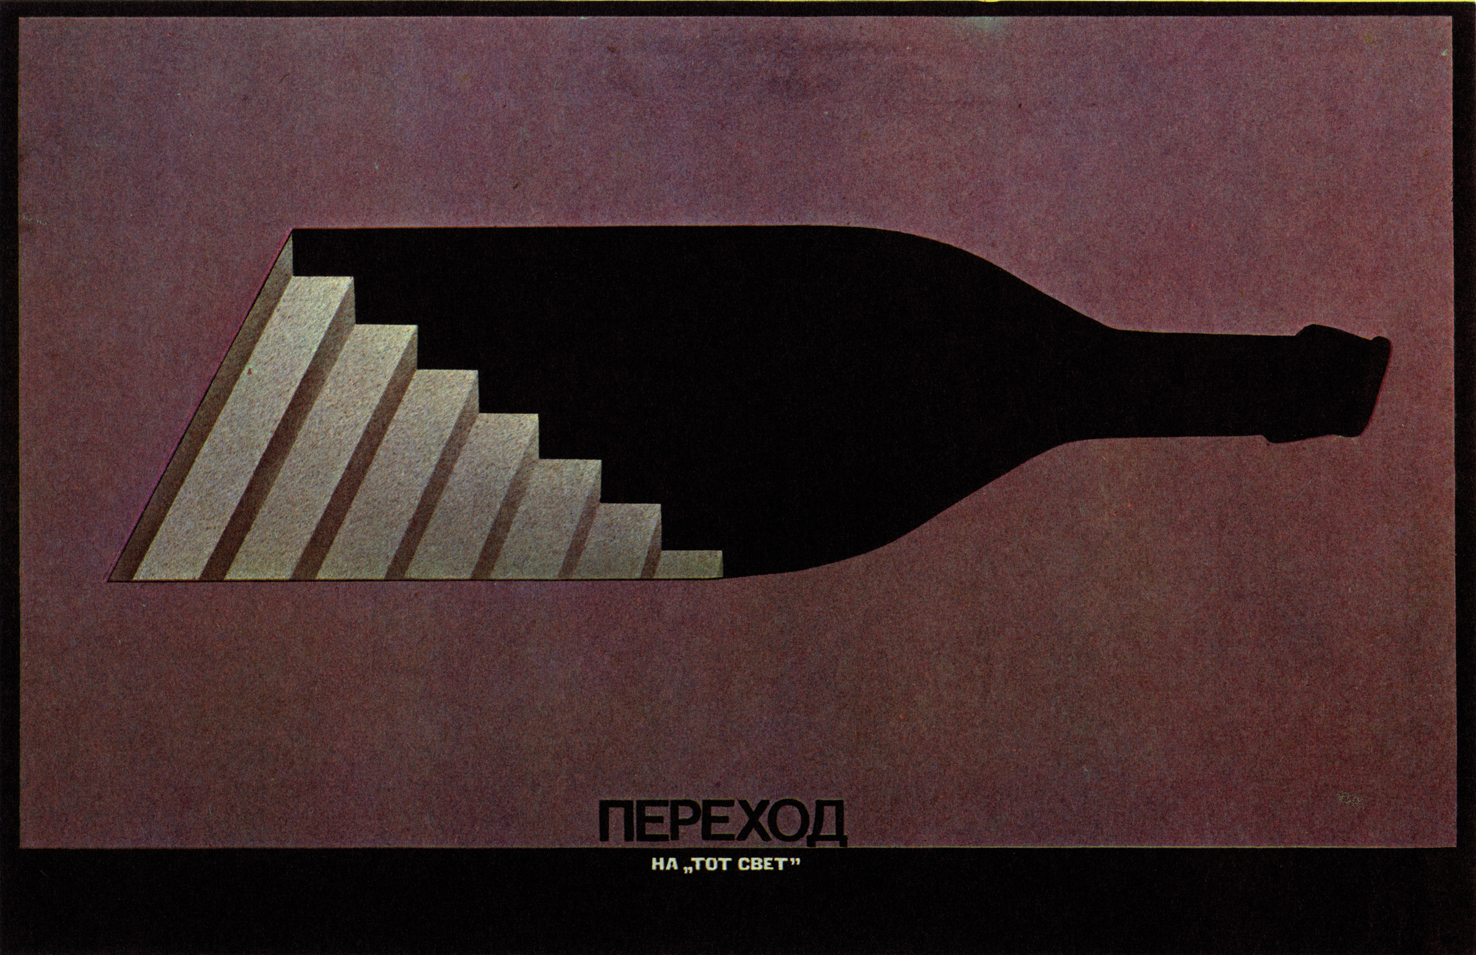 The Paris Review - Booze in the USSR: Soviet Anti-Alcohol Propaganda Posters